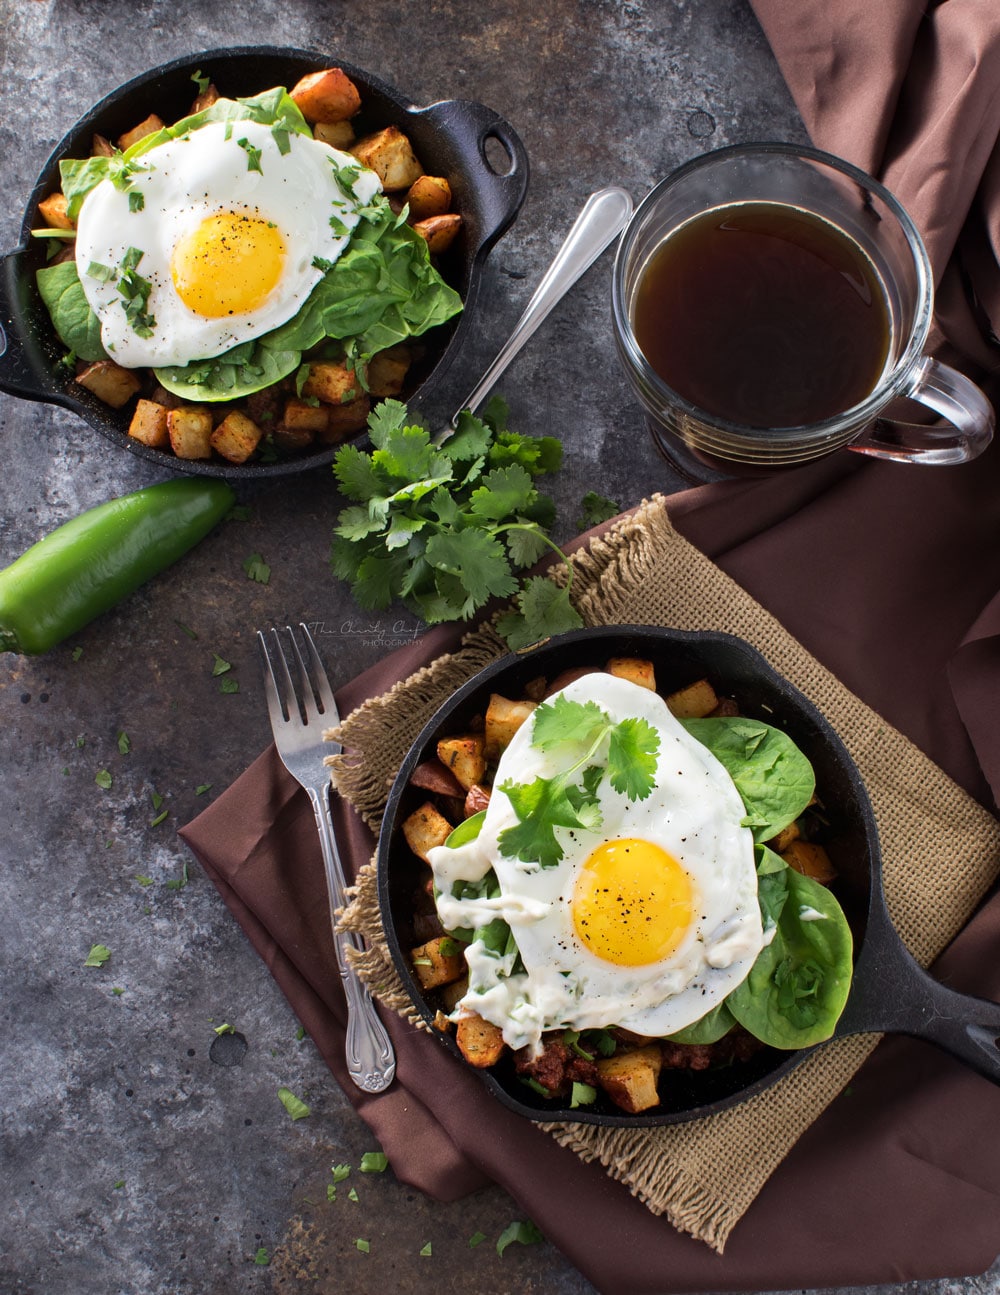 Chorizo Potato Hash with Jalapeno Aioli | Kick your breakfast up a notch with this delicious chorizo potato hash, topped with a sunny side up egg and drizzled with a homemade jalapeno aioli! |http://thechunkychef.com